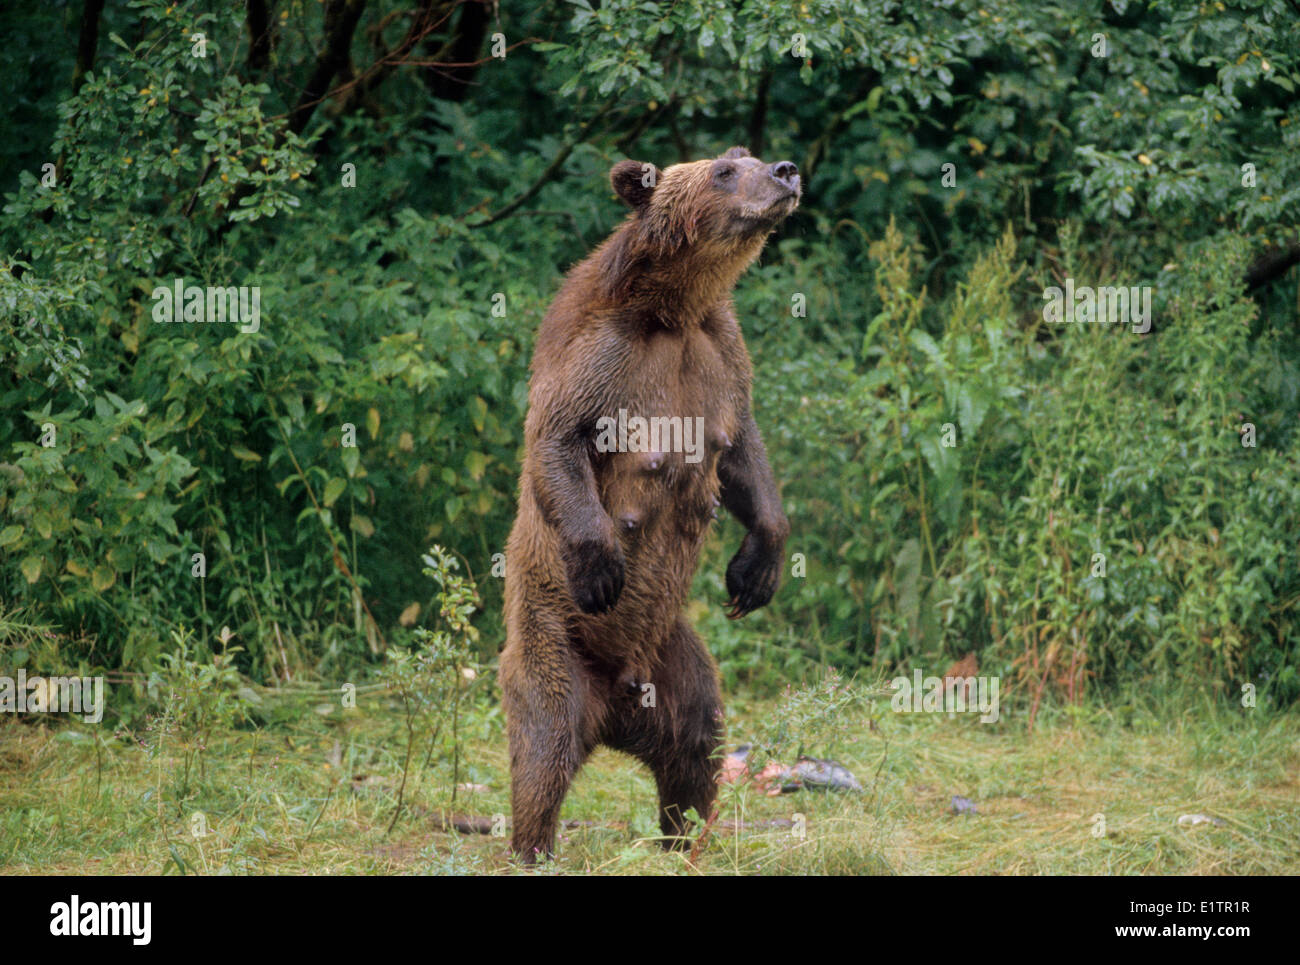 Grizzly Bear (Ursus arctos horribilis) Adult Female scenting air for danger. Summer, Alaska, United States of America. Stock Photo